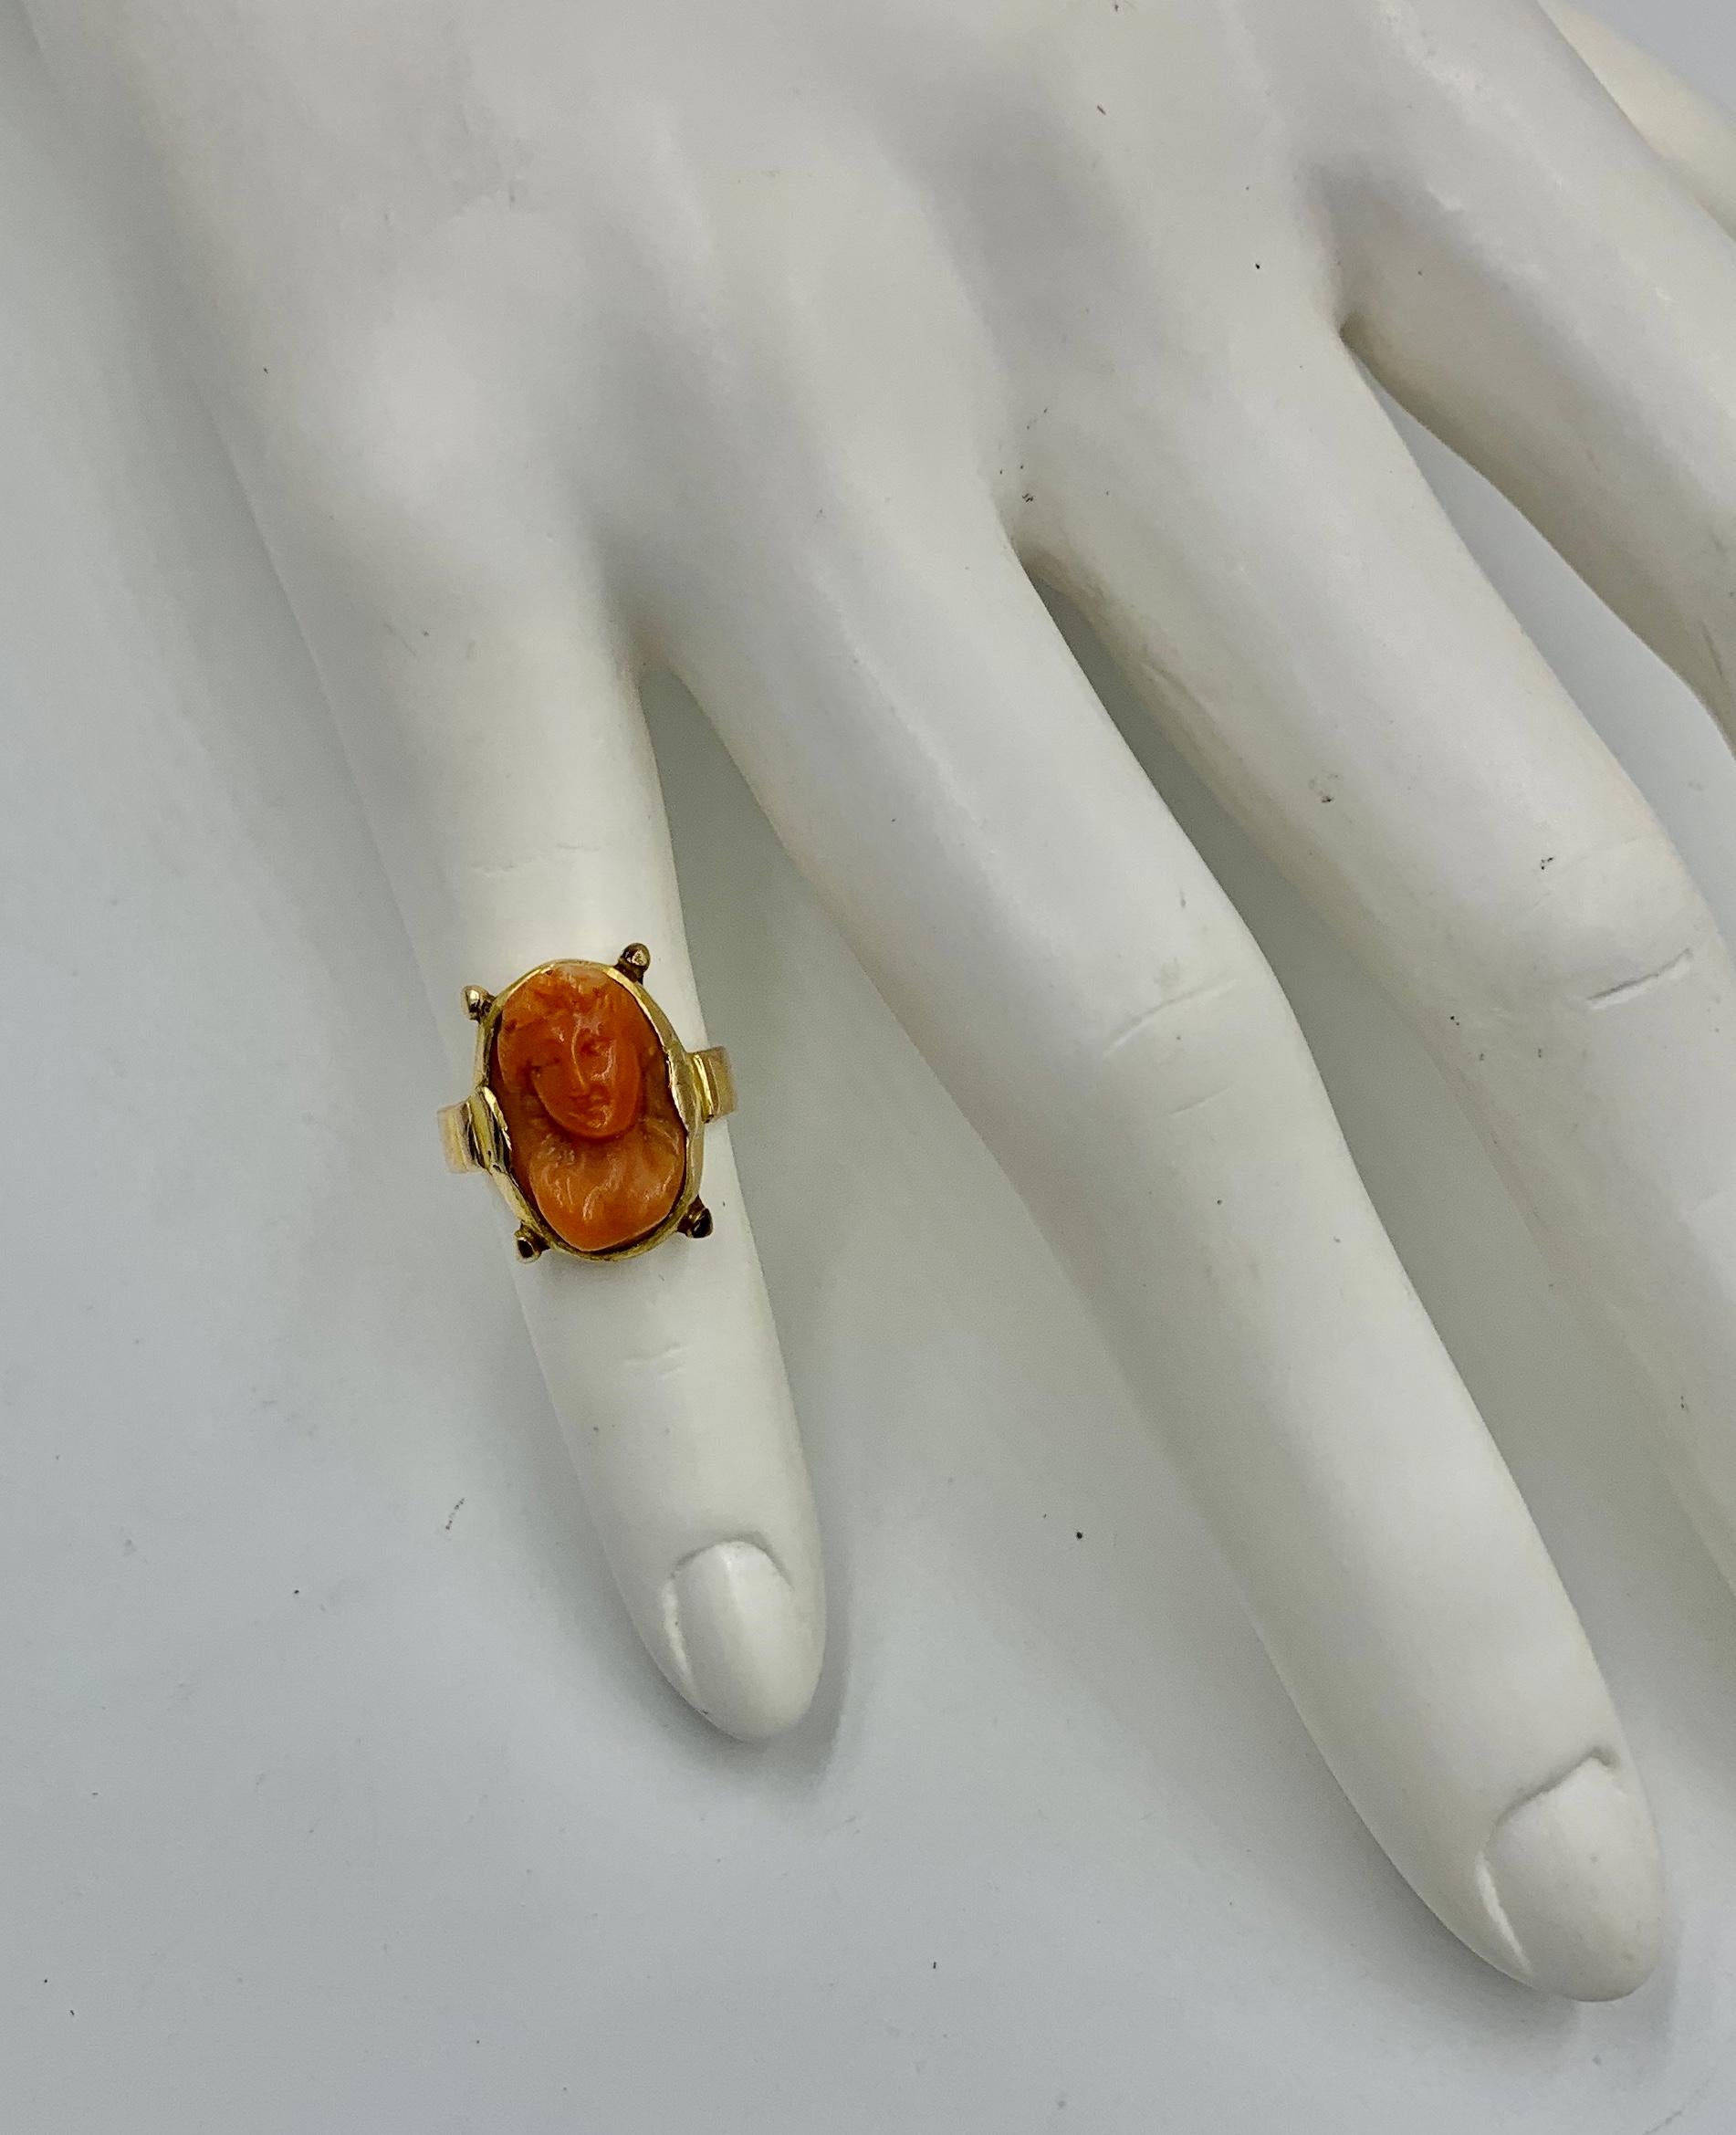 A superb Victorian - Belle Epoque deeply carved Coral Cameo Ring depicting a nude woman with absolutely magnificent detail and artisanship in a beautiful and elegant Etruscan Revival setting in 14 Karat Gold.  The ring dates to circa 1850-1880.  The